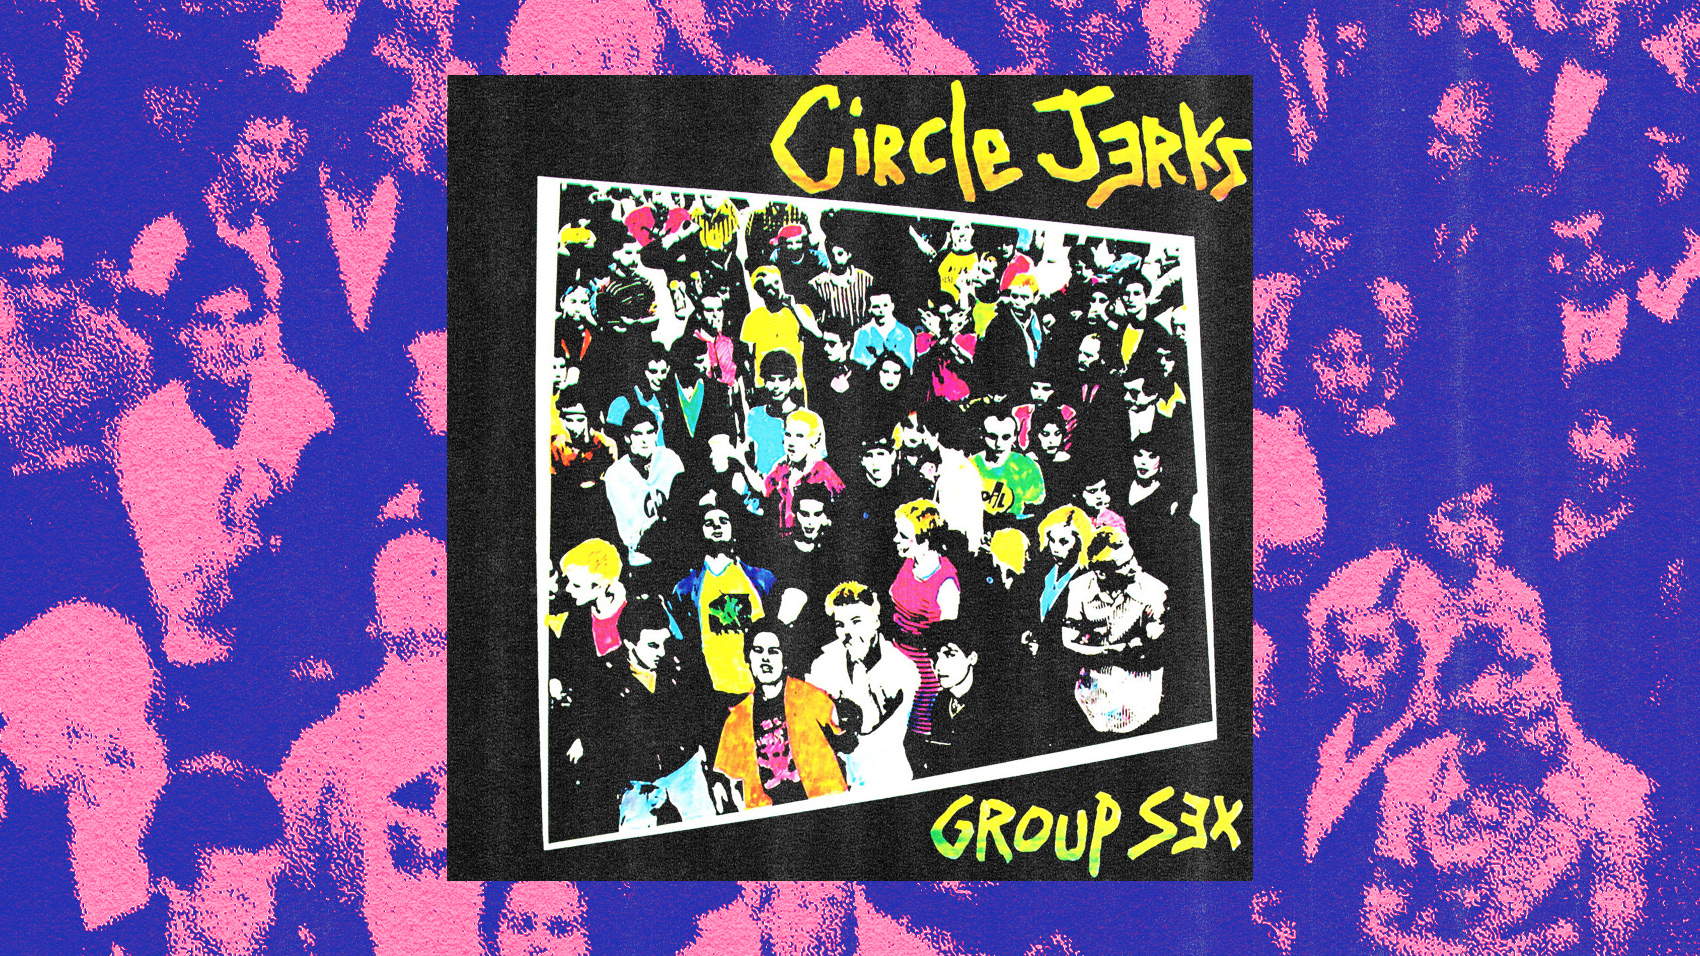 Group Sex Turns 40 An Oral History of Circle Jerks Debut image